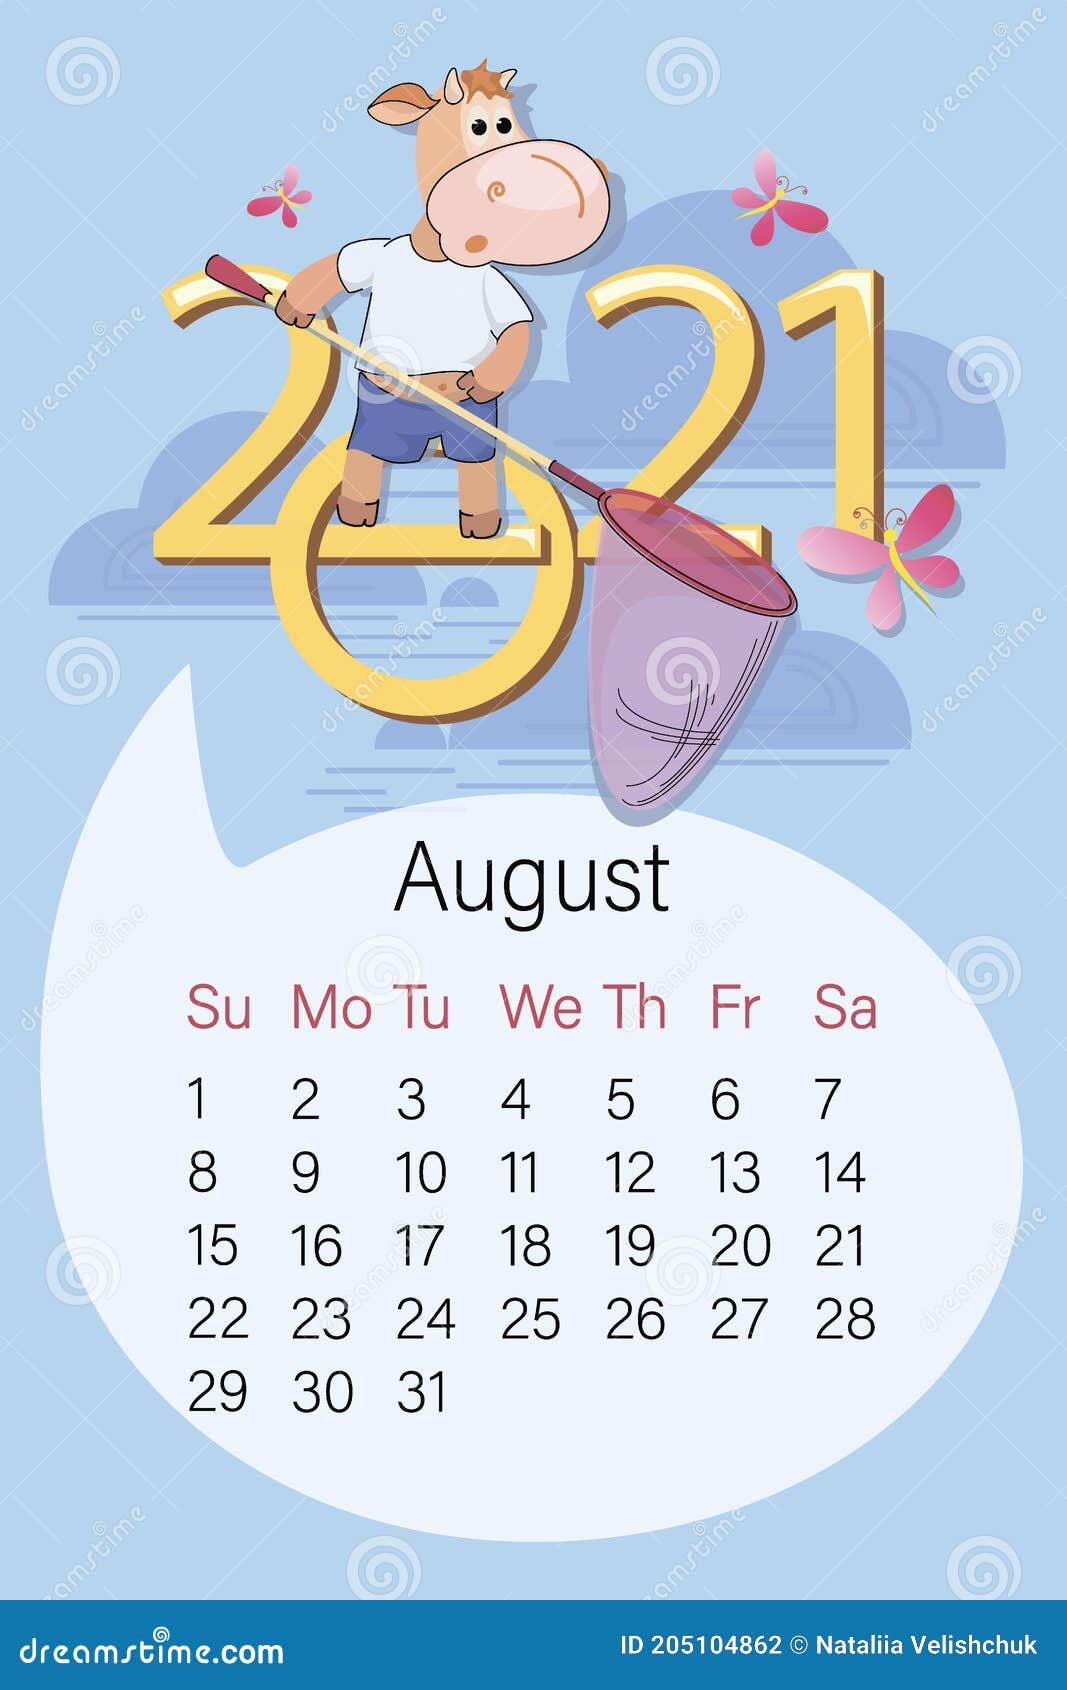 August 2021. Bullish Calendar. Summer Fun, Hobby, Hunting. Funny Calf with  Butterfly Net,butterflies Stock Illustration - Illustration of clouds,  calf: 205104862